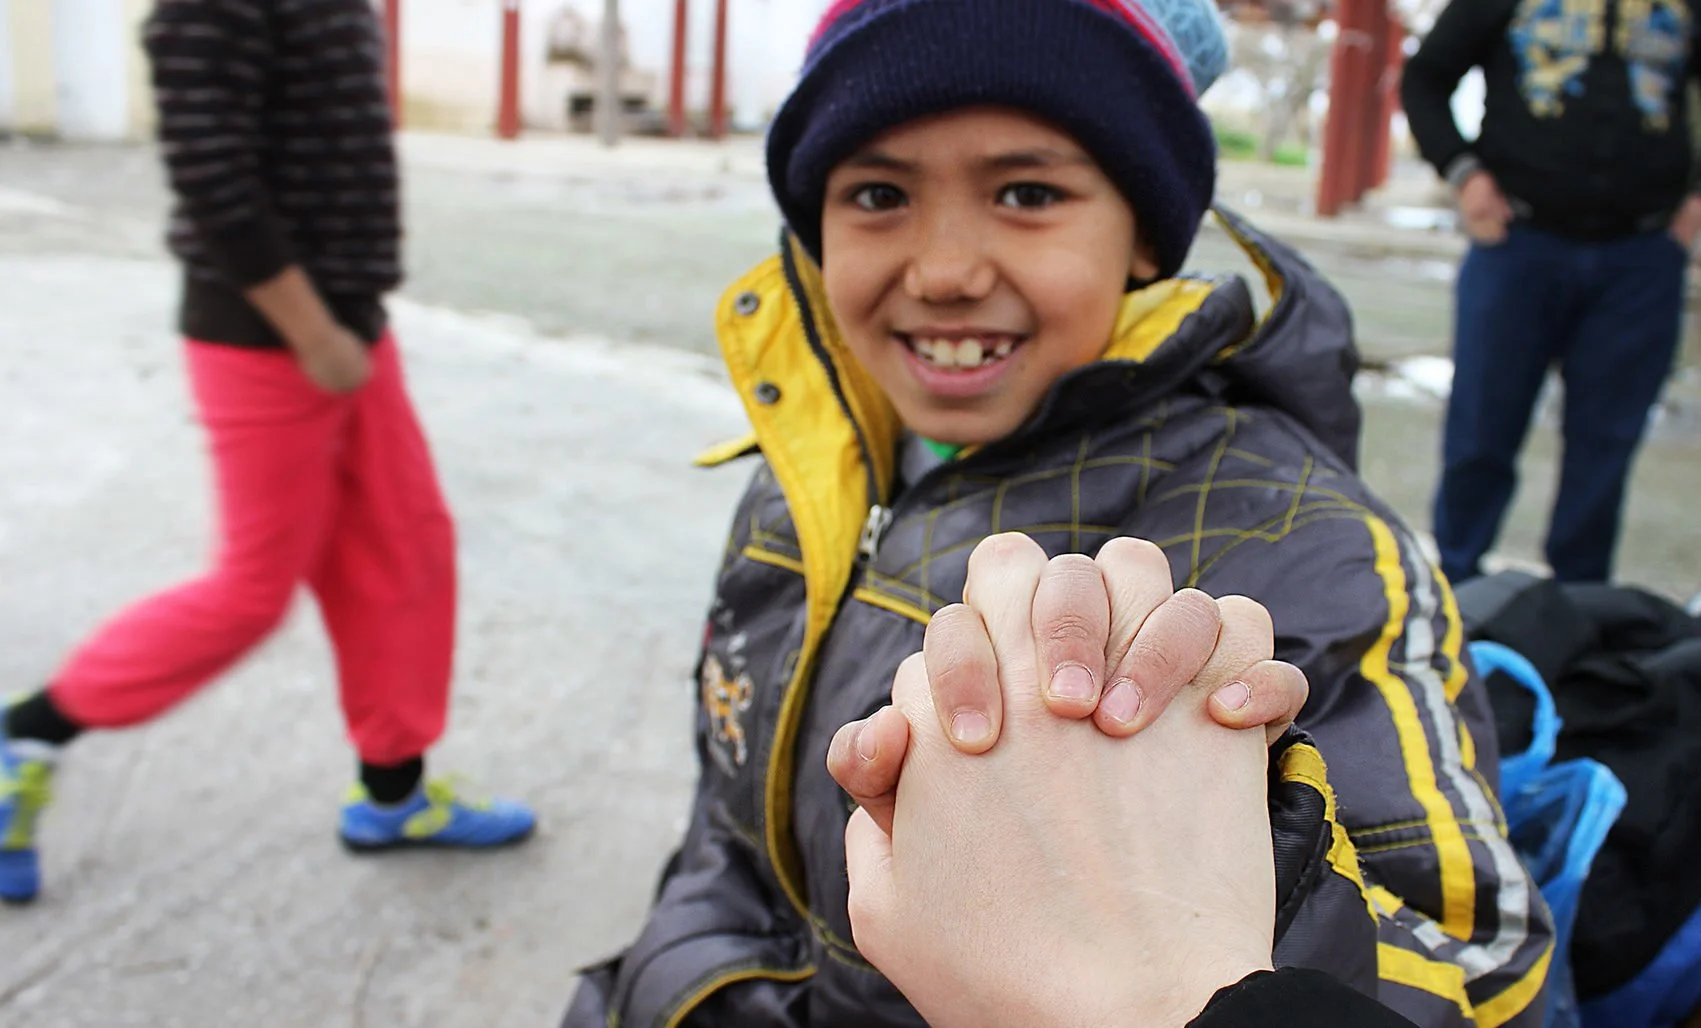 Young refugee boy holding someone's hand